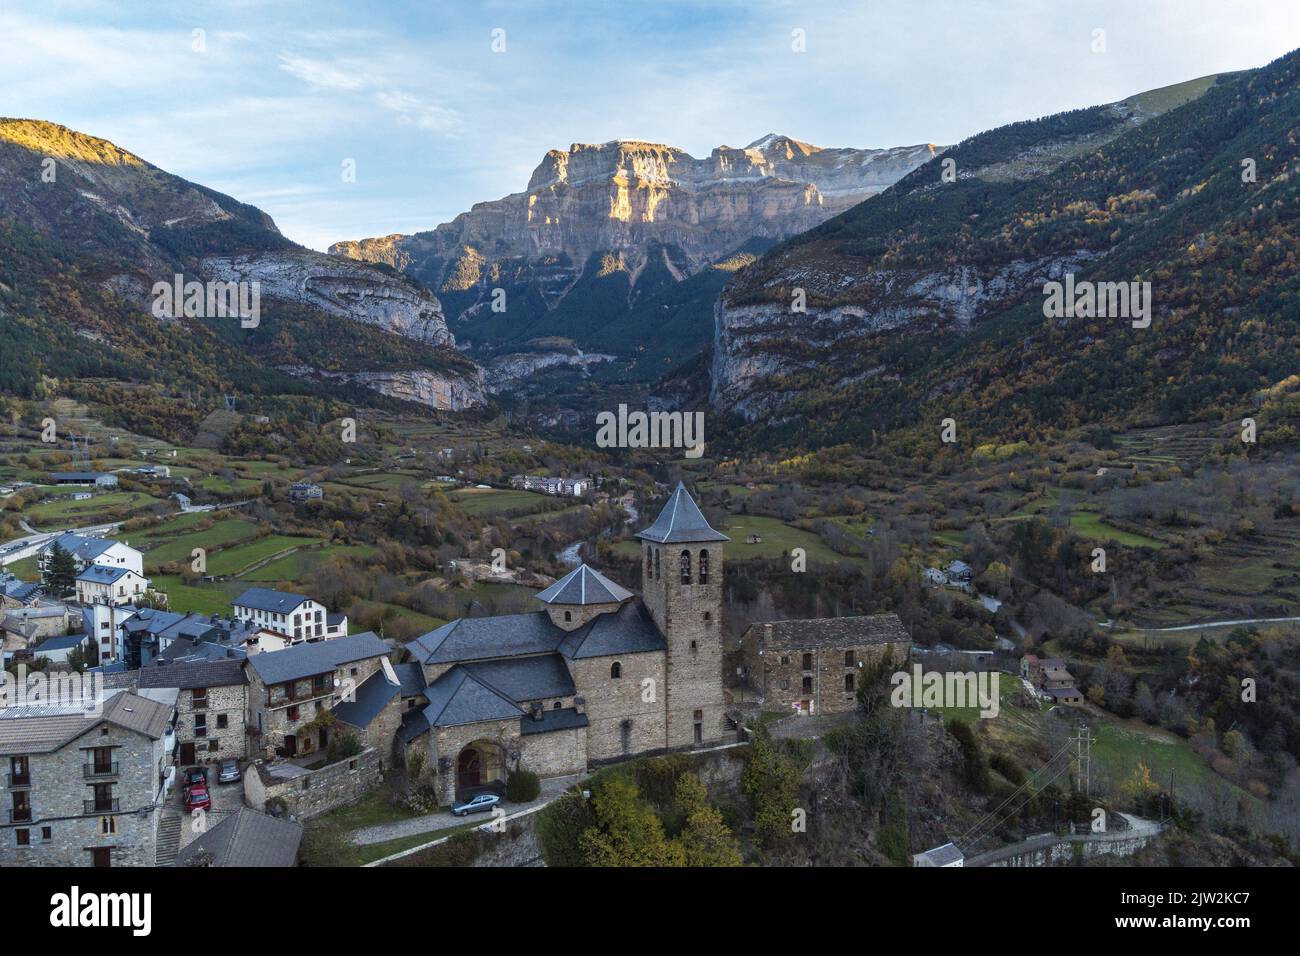 Picturesque drone view of ancient stone castle and residential houses surrounded by massive rocky mountains in Torla Ordesa town in Huesca Stock Photo